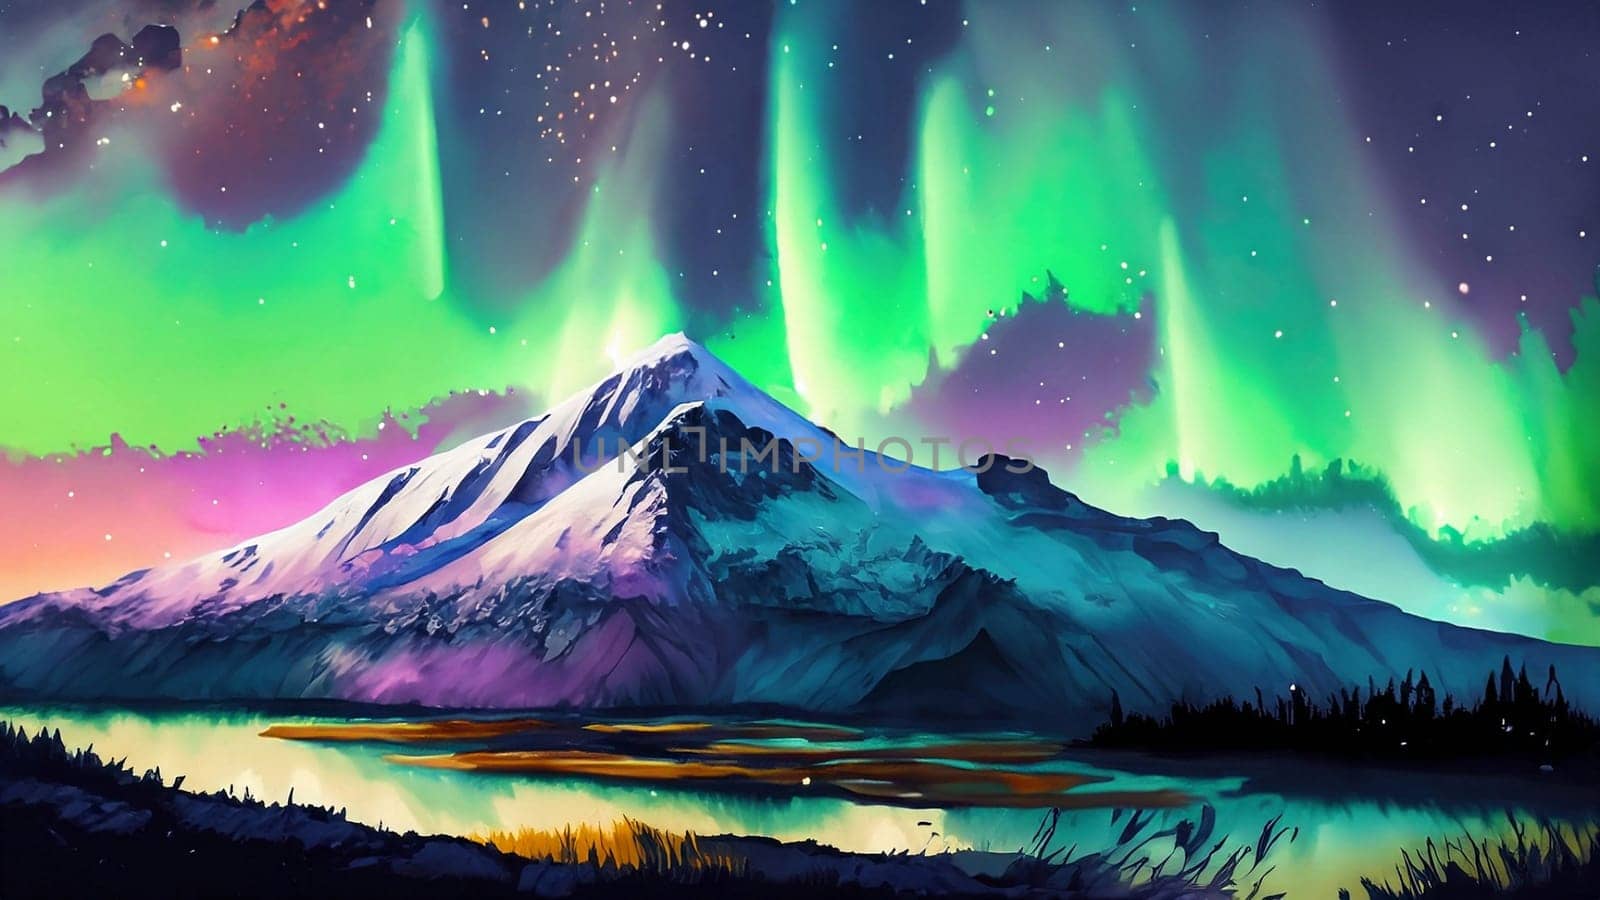 Northern lights in the night sky over the mountains. Abstract painting. Impressionist style. Imitation of oil painting. Painting for interior. Digital illustration. High quality illustration